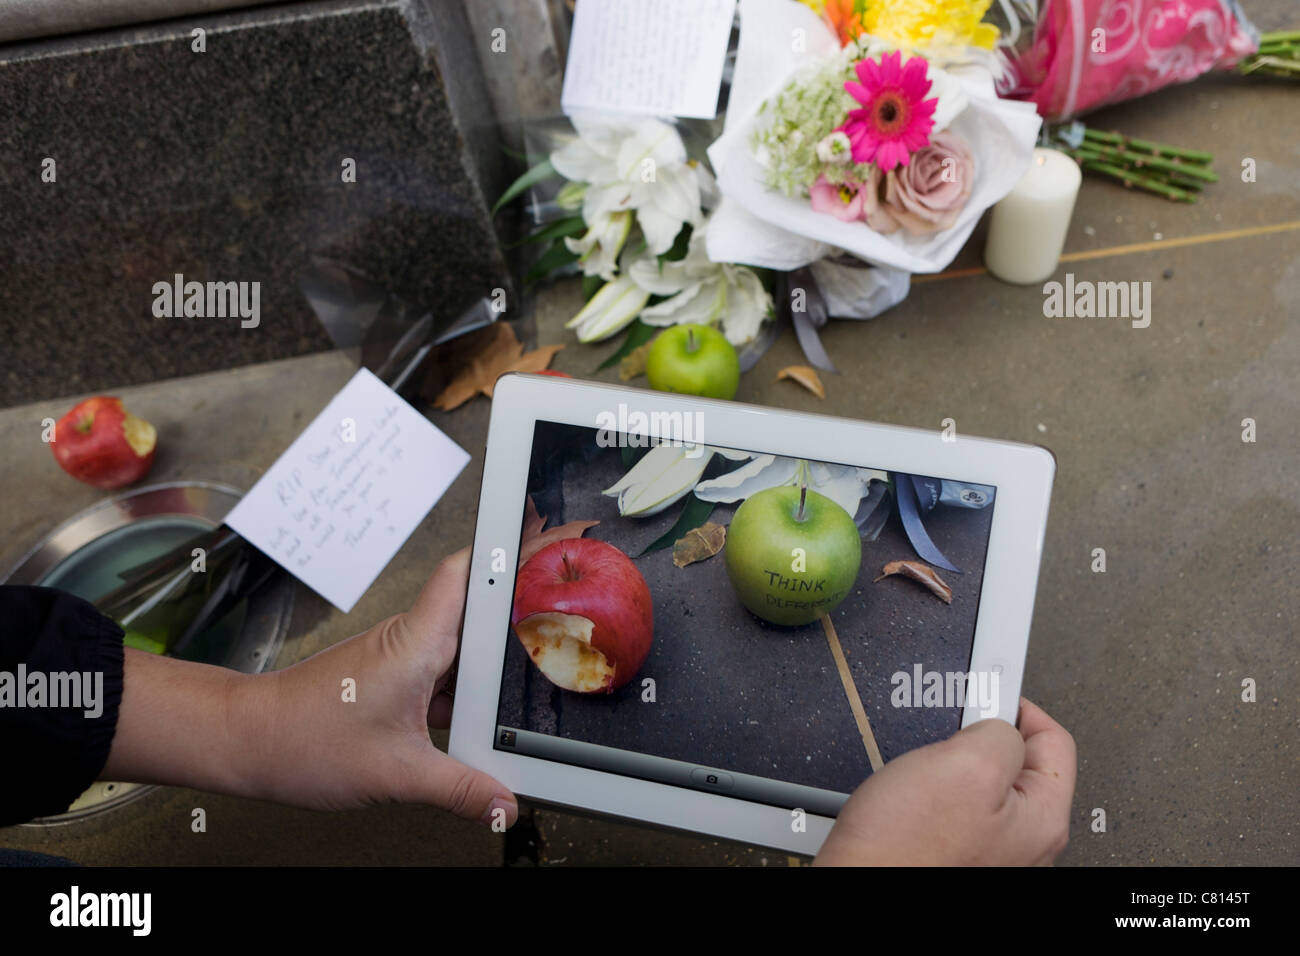 Photographing the makeshift shrine to Apple's Steve Jobs, the morning after his death was announced at age of 56 from Cancer. Stock Photo